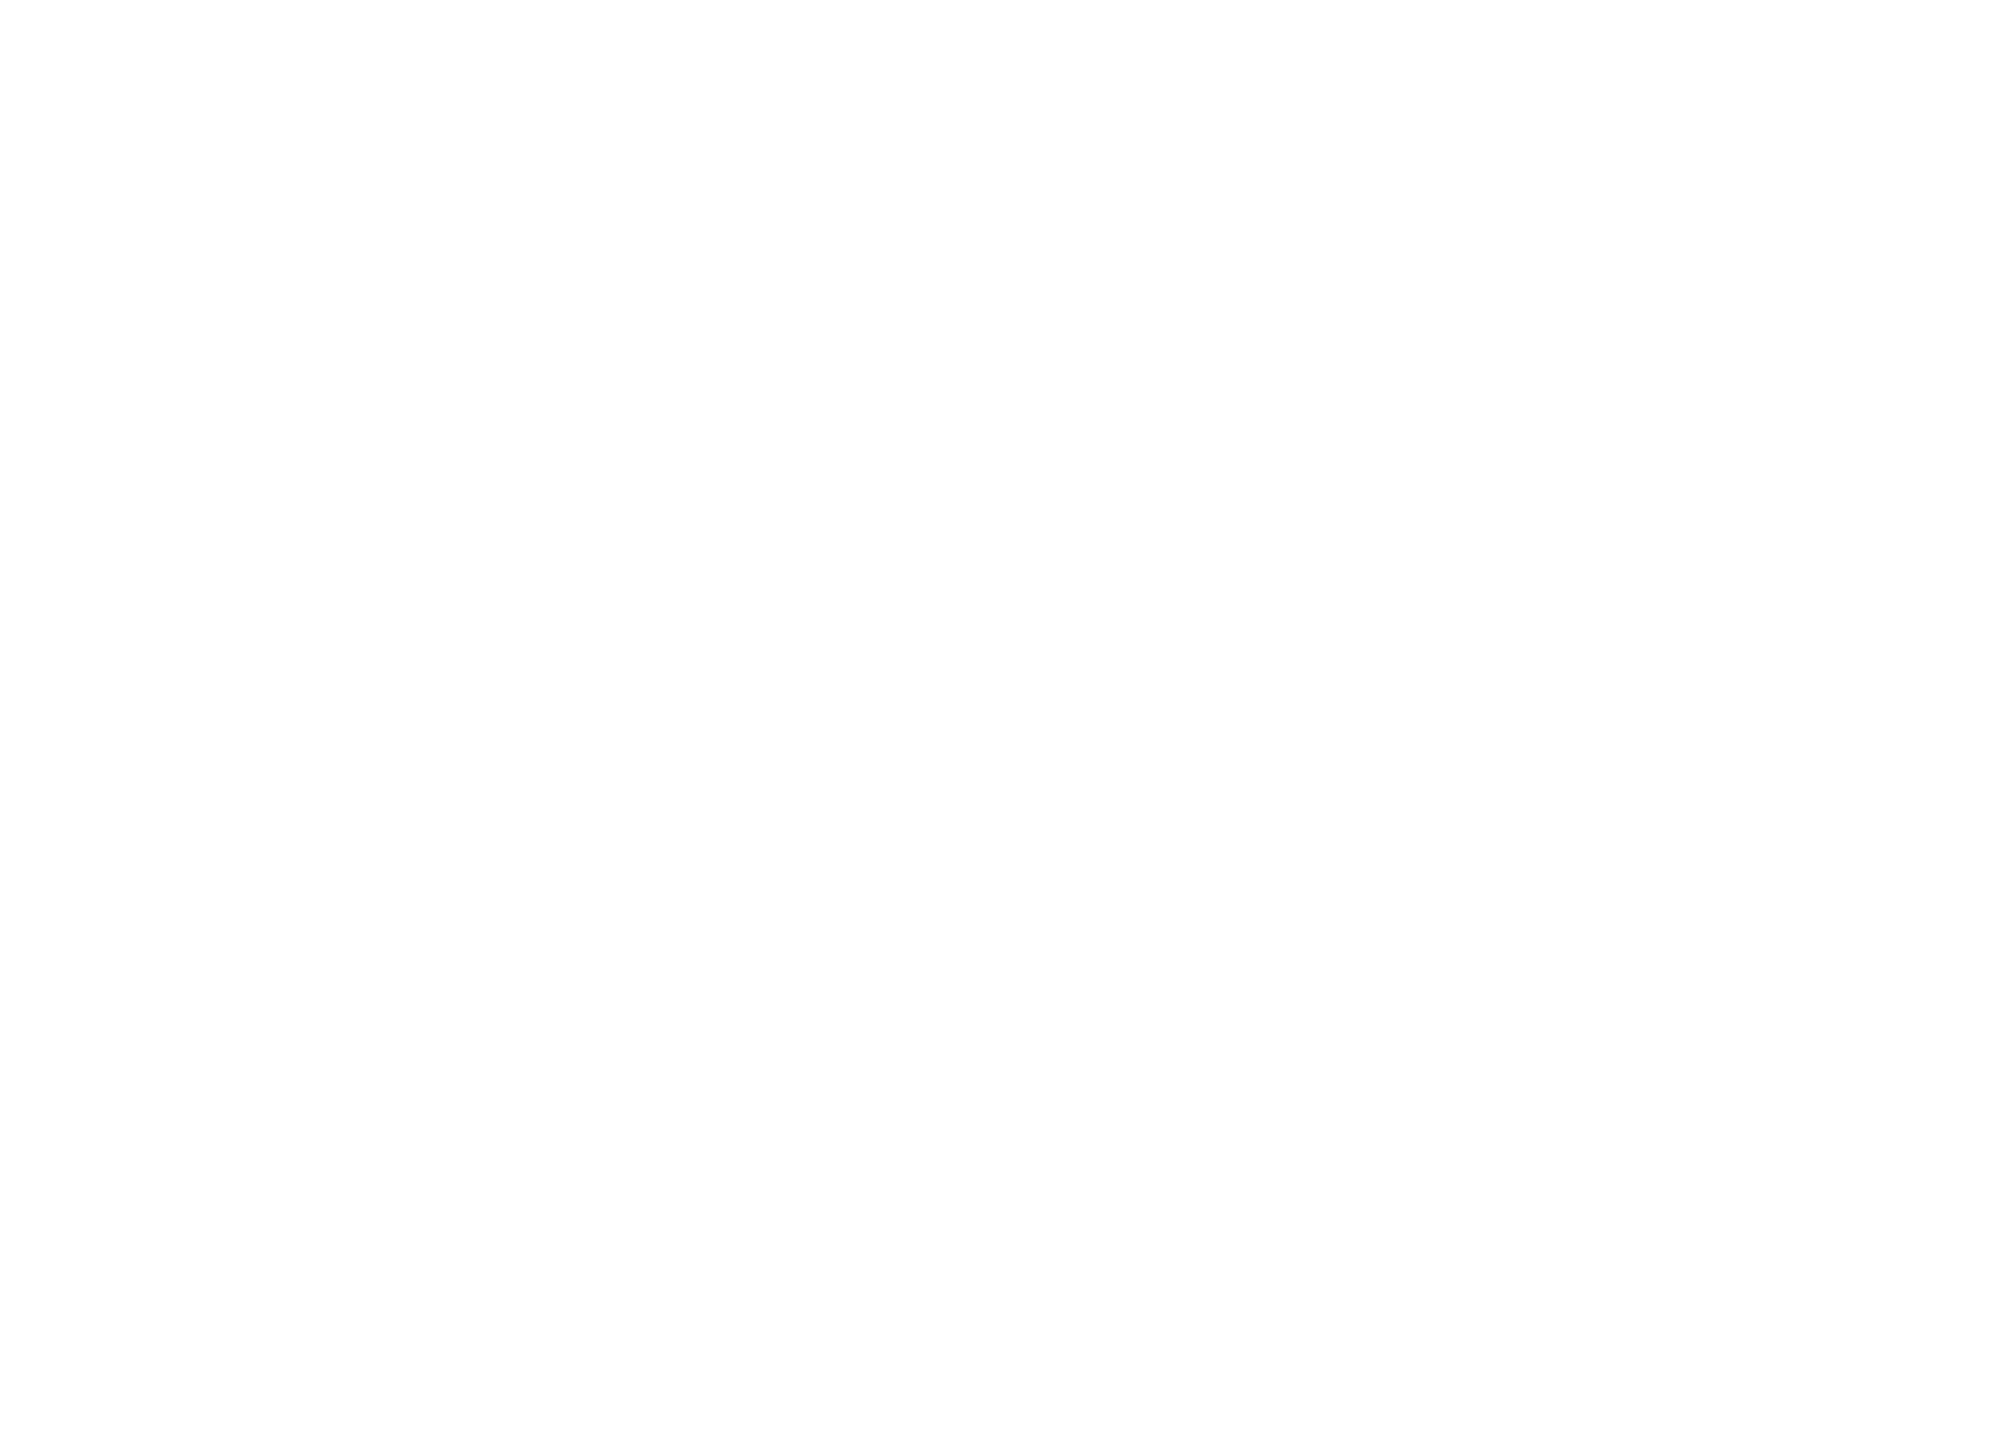 WhiskeyRoots